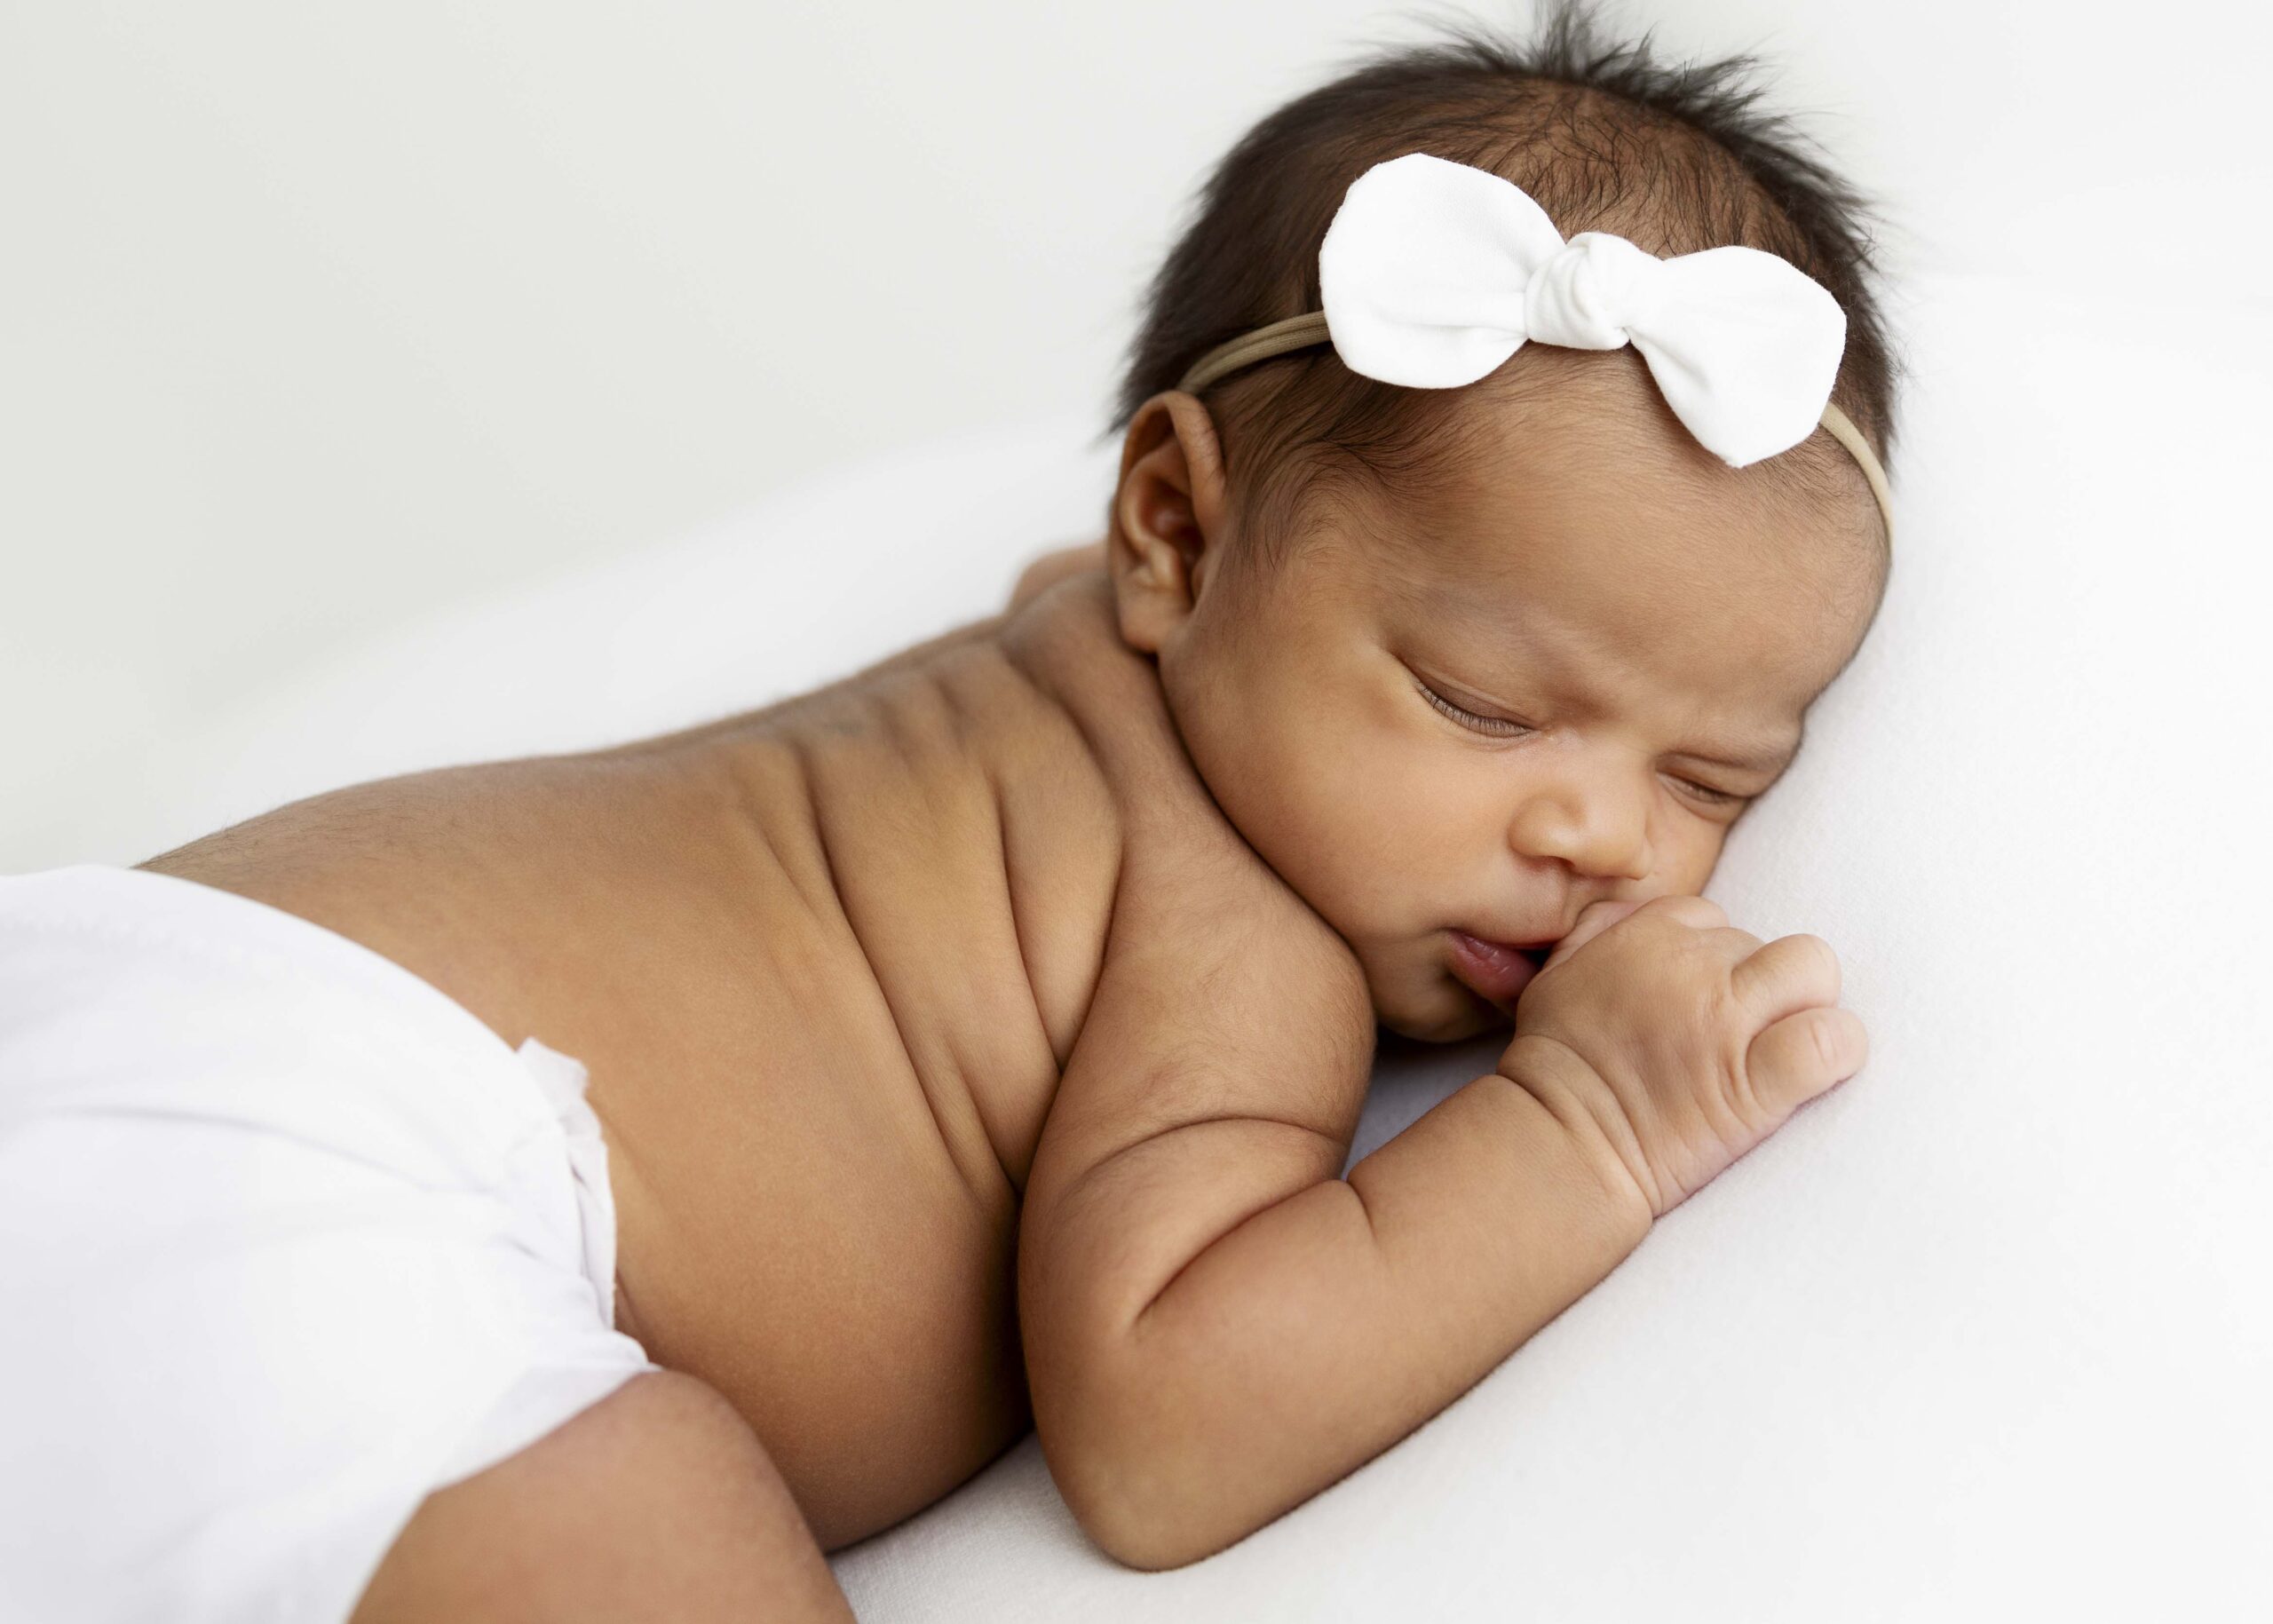 Newborn baby sleeping on her belly with a white bow in her hair